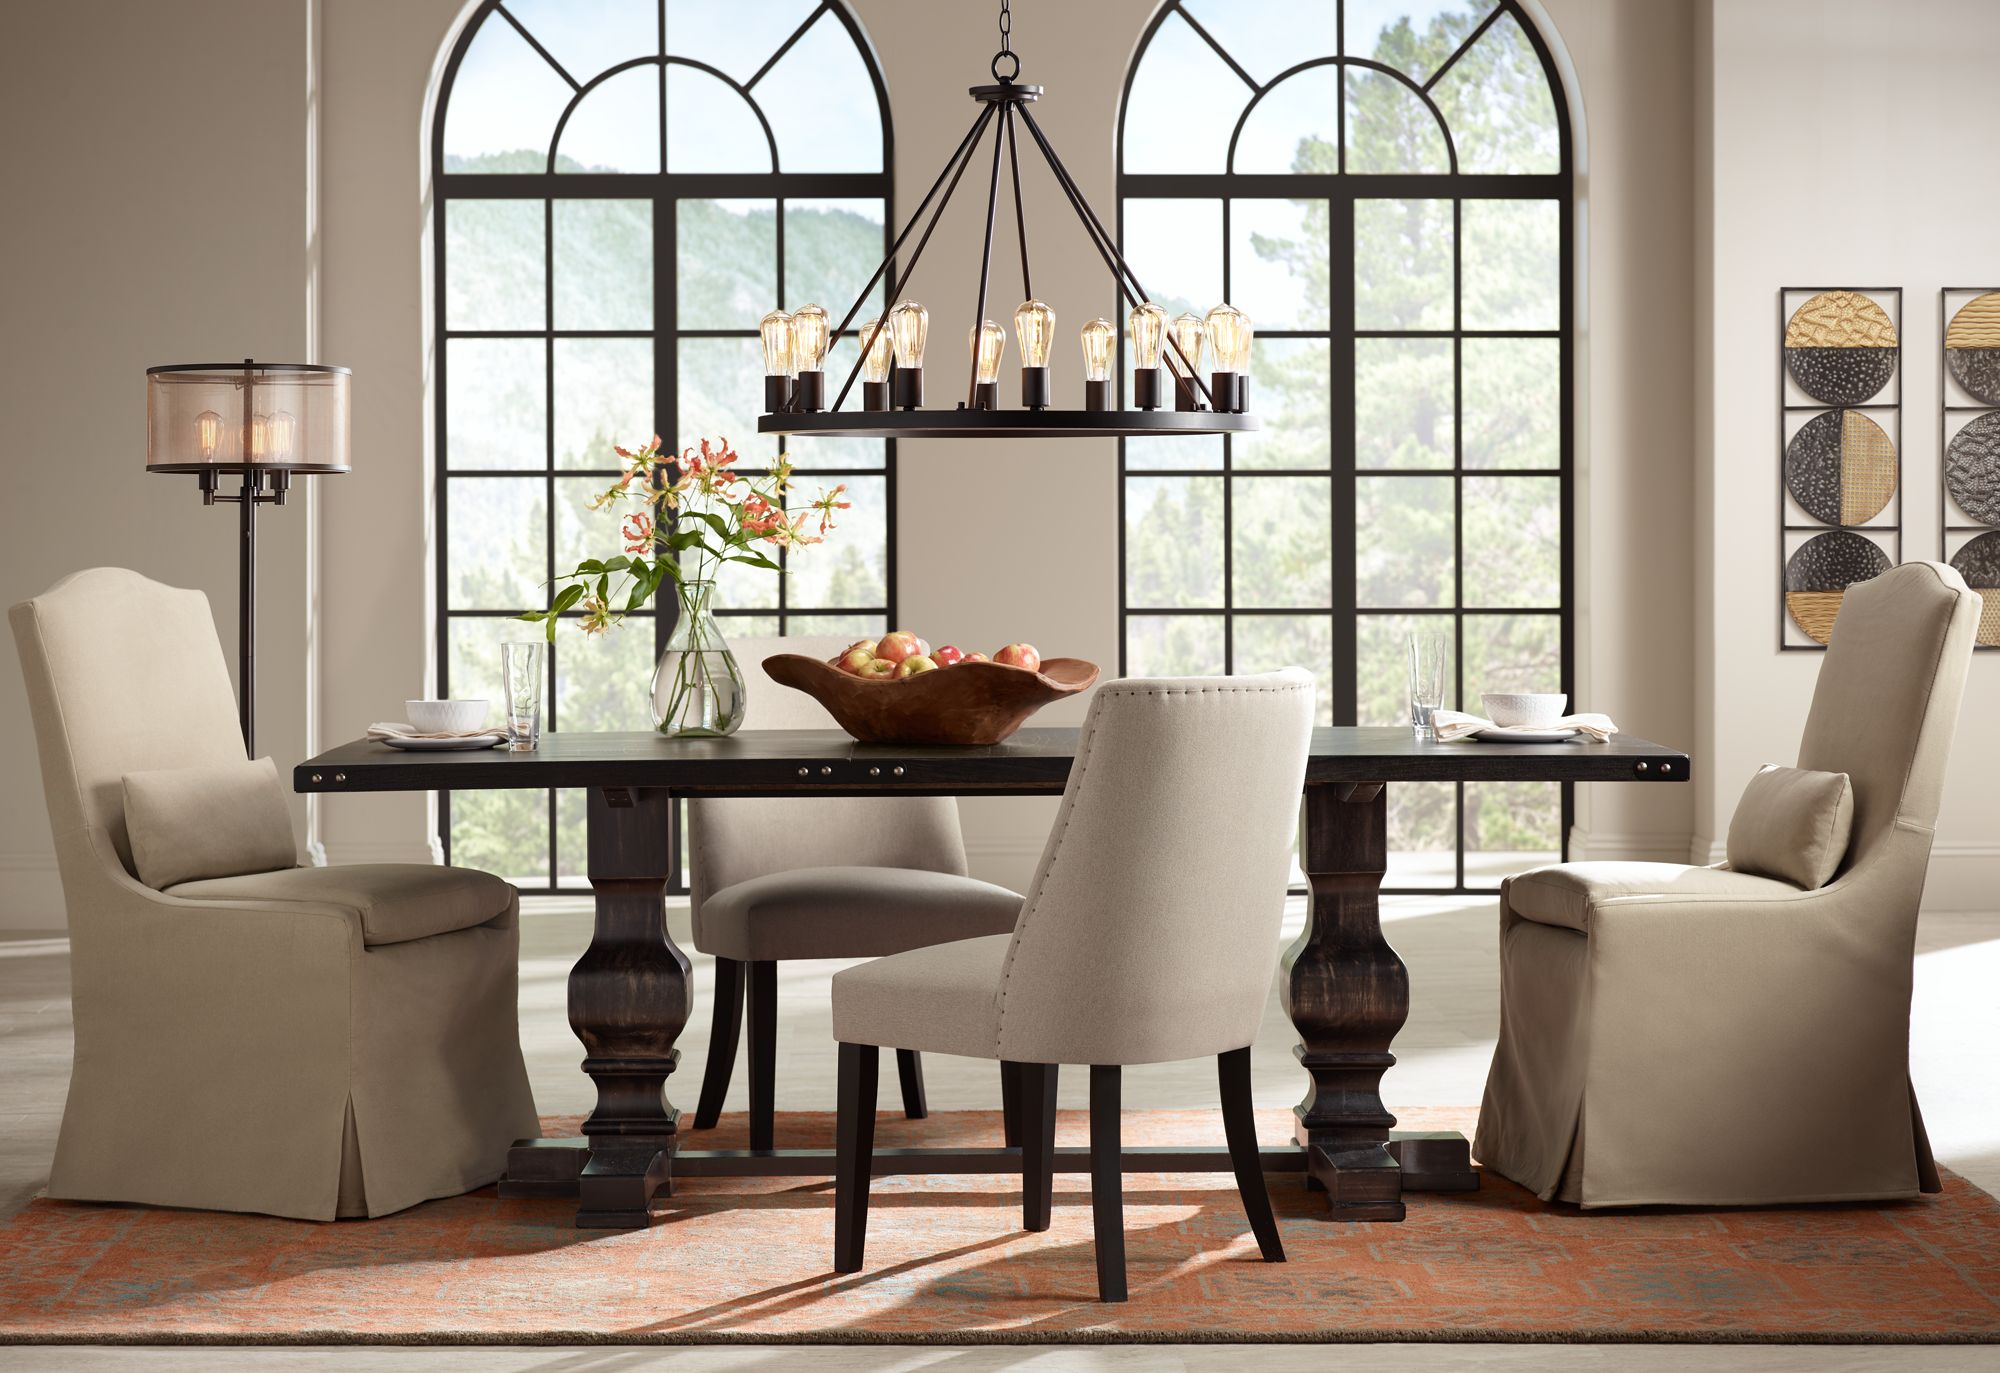 Tips for decorating small dining rooms